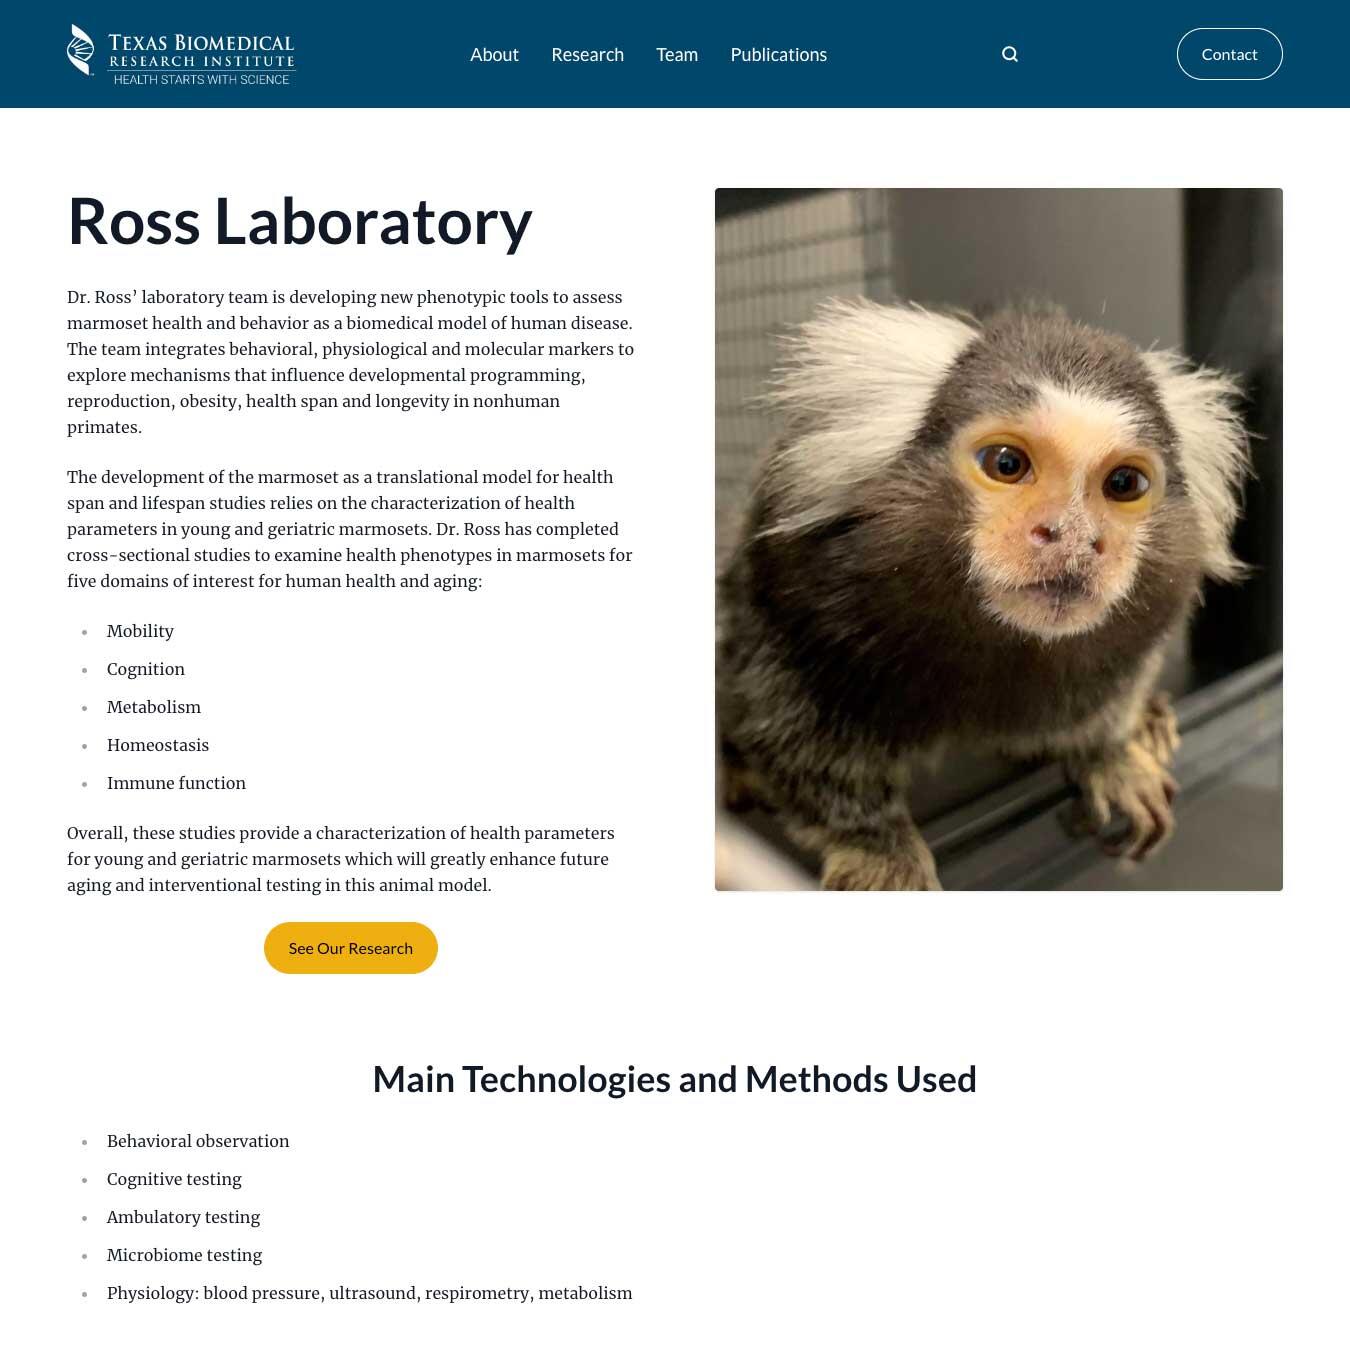 Ross Laboratory at Texas Biomedical Research Institutes website